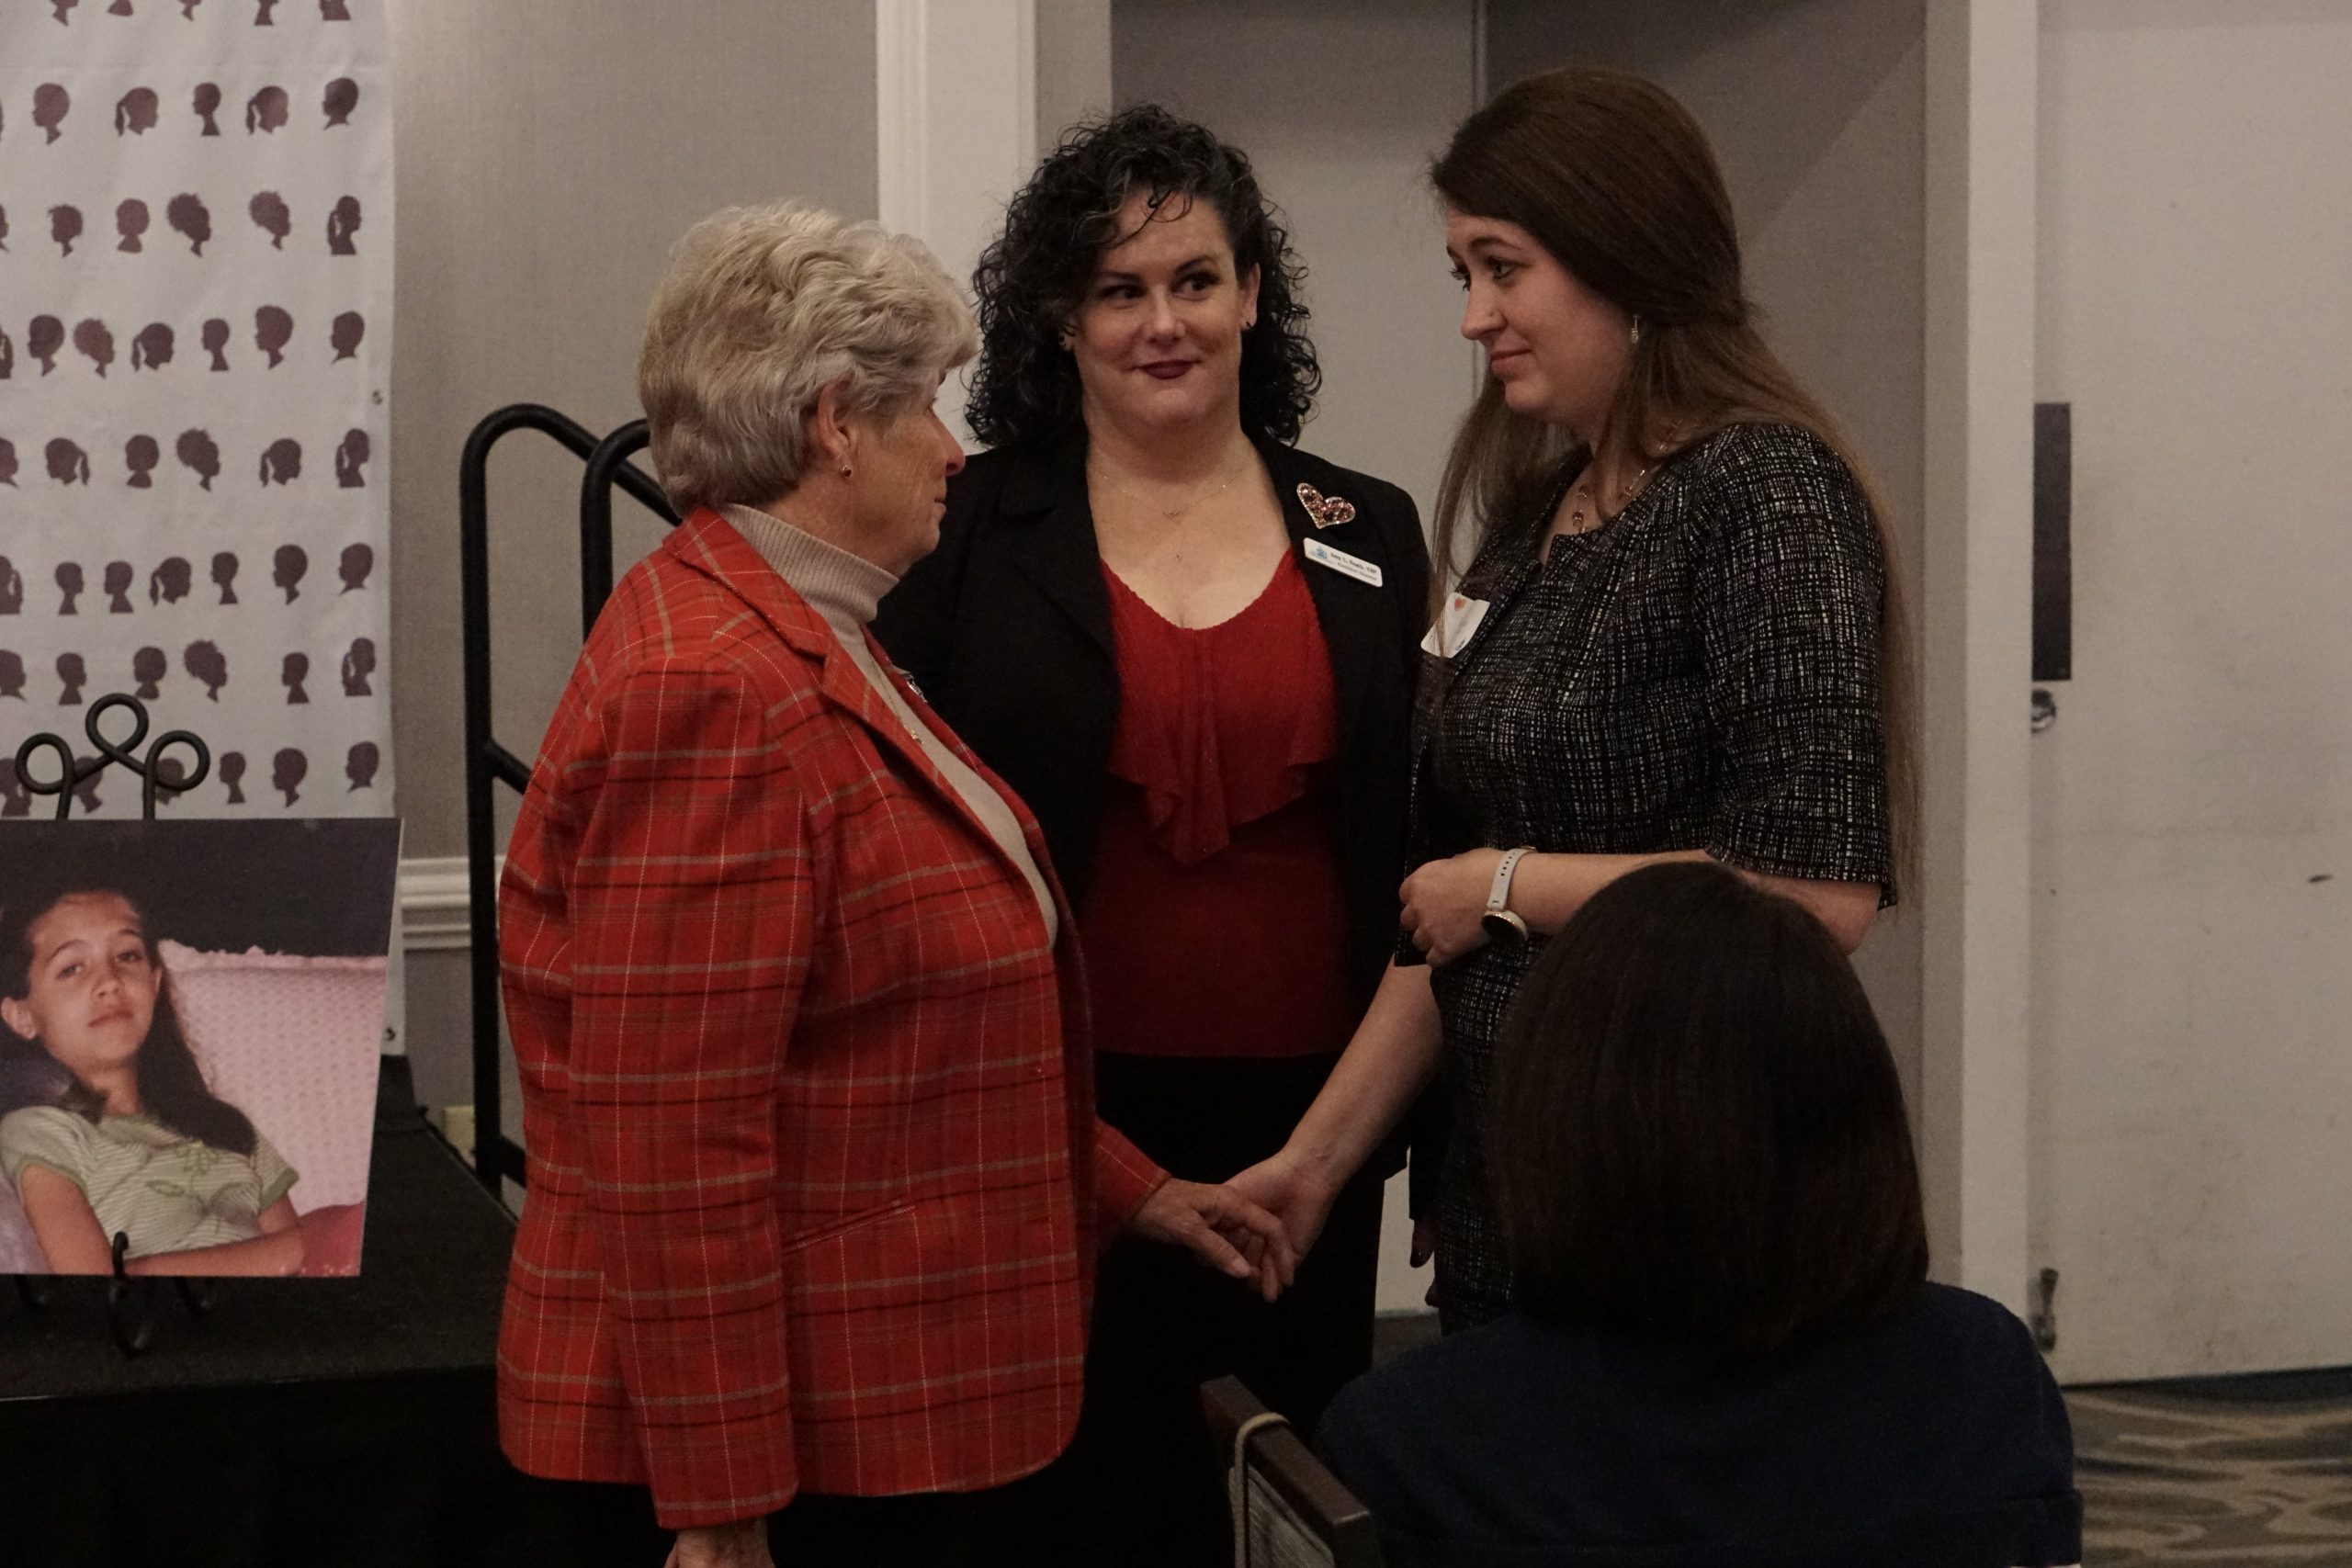 Kendall Wolz, Keynote Speaker talking with Amy Feath, current Executive Director and Gail McGirt TCC Founding Executive Director